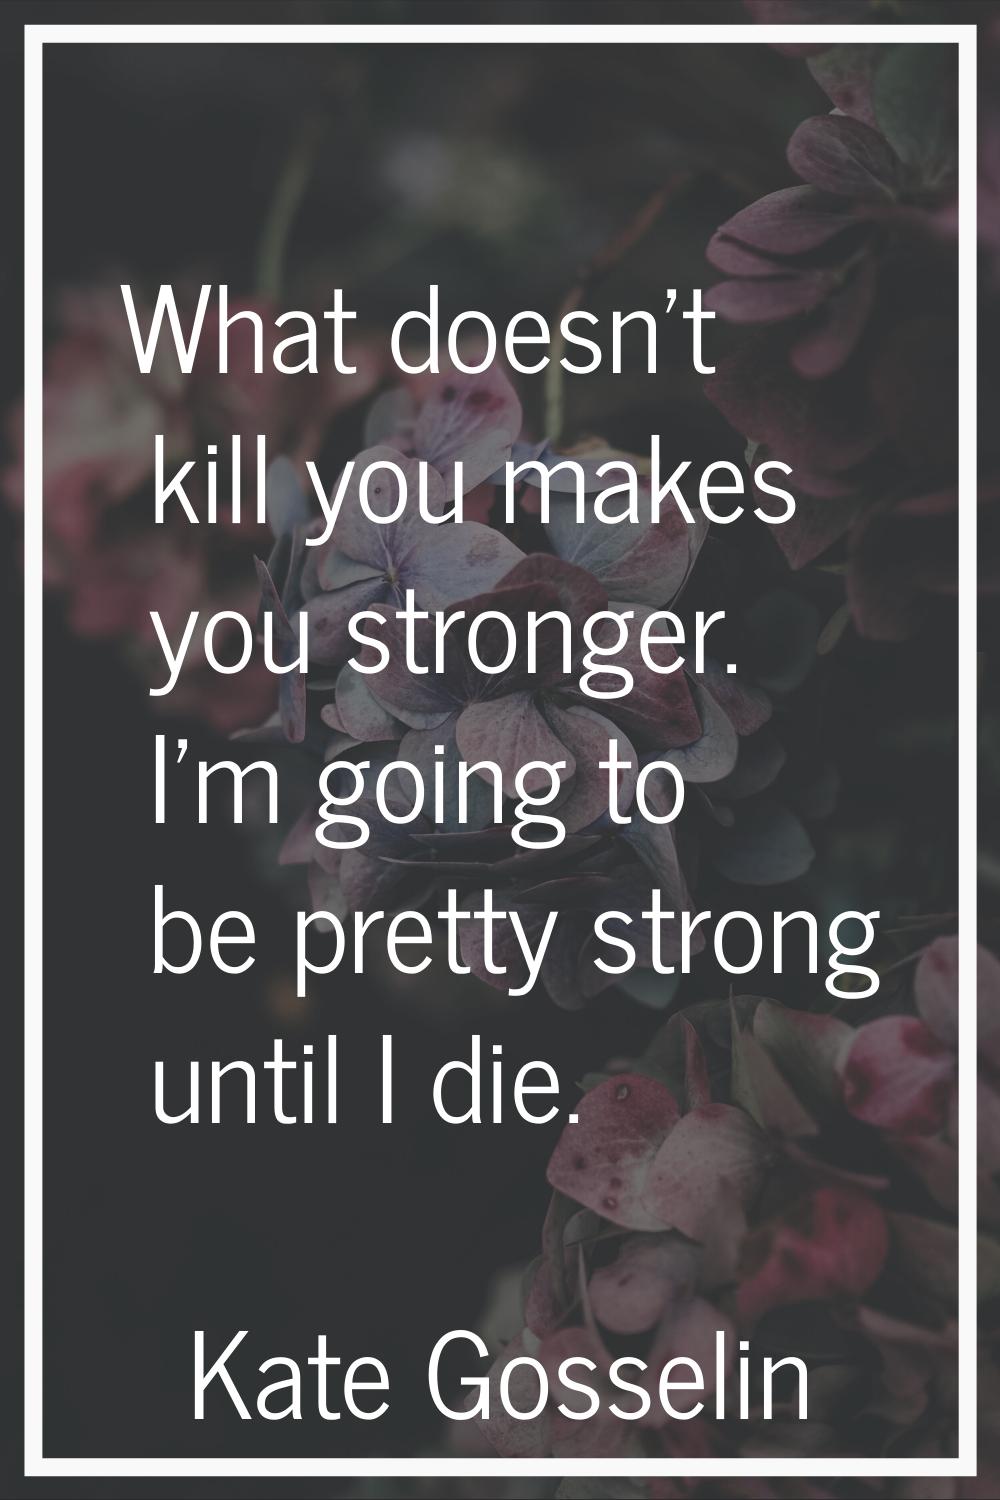 What doesn't kill you makes you stronger. I'm going to be pretty strong until I die.